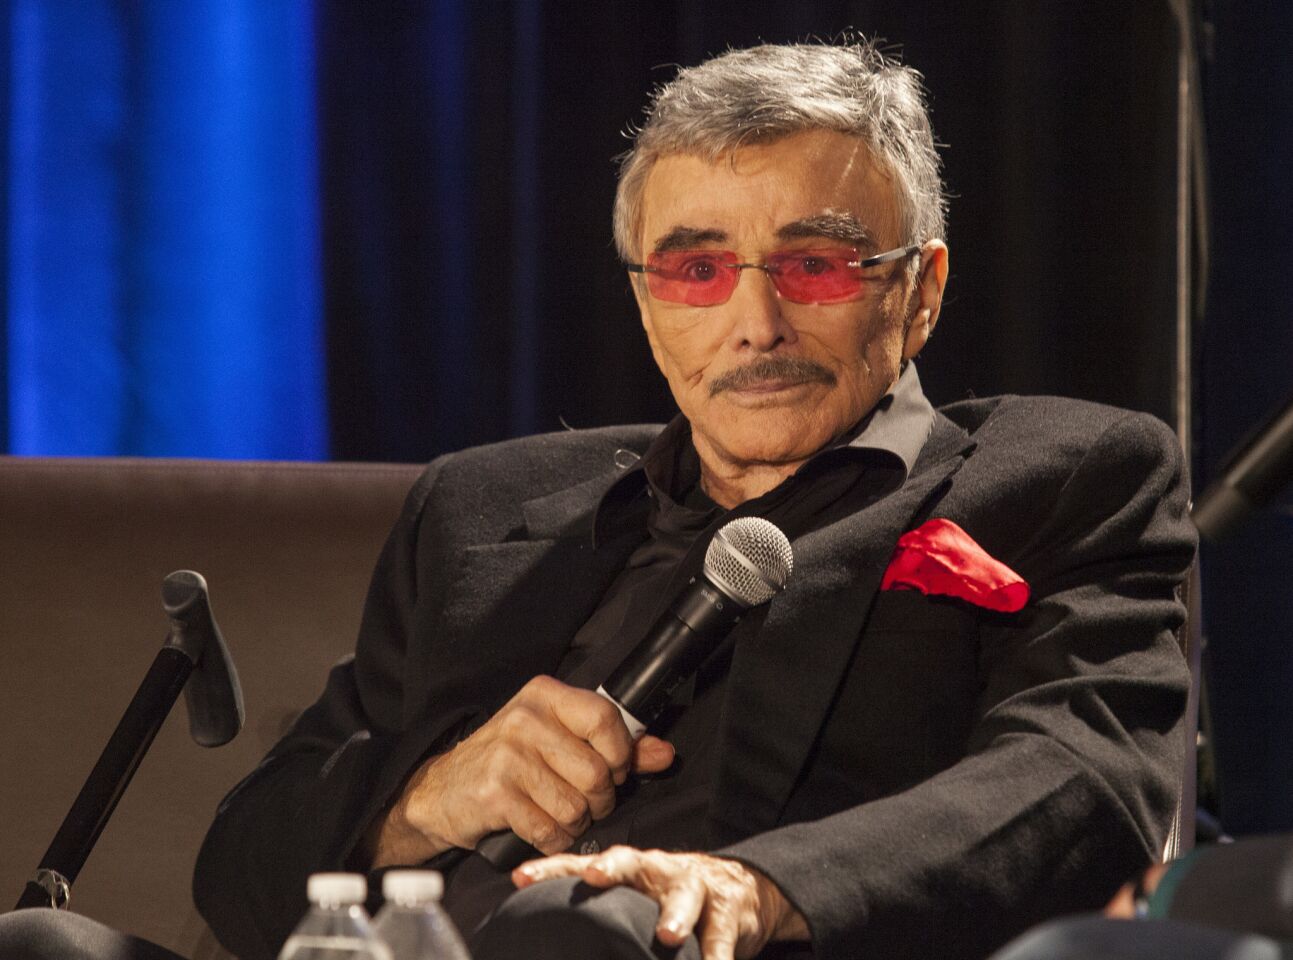 Burt Reynolds at the Wizard World Chicago Comic-Con on Aug. 22, 2015.